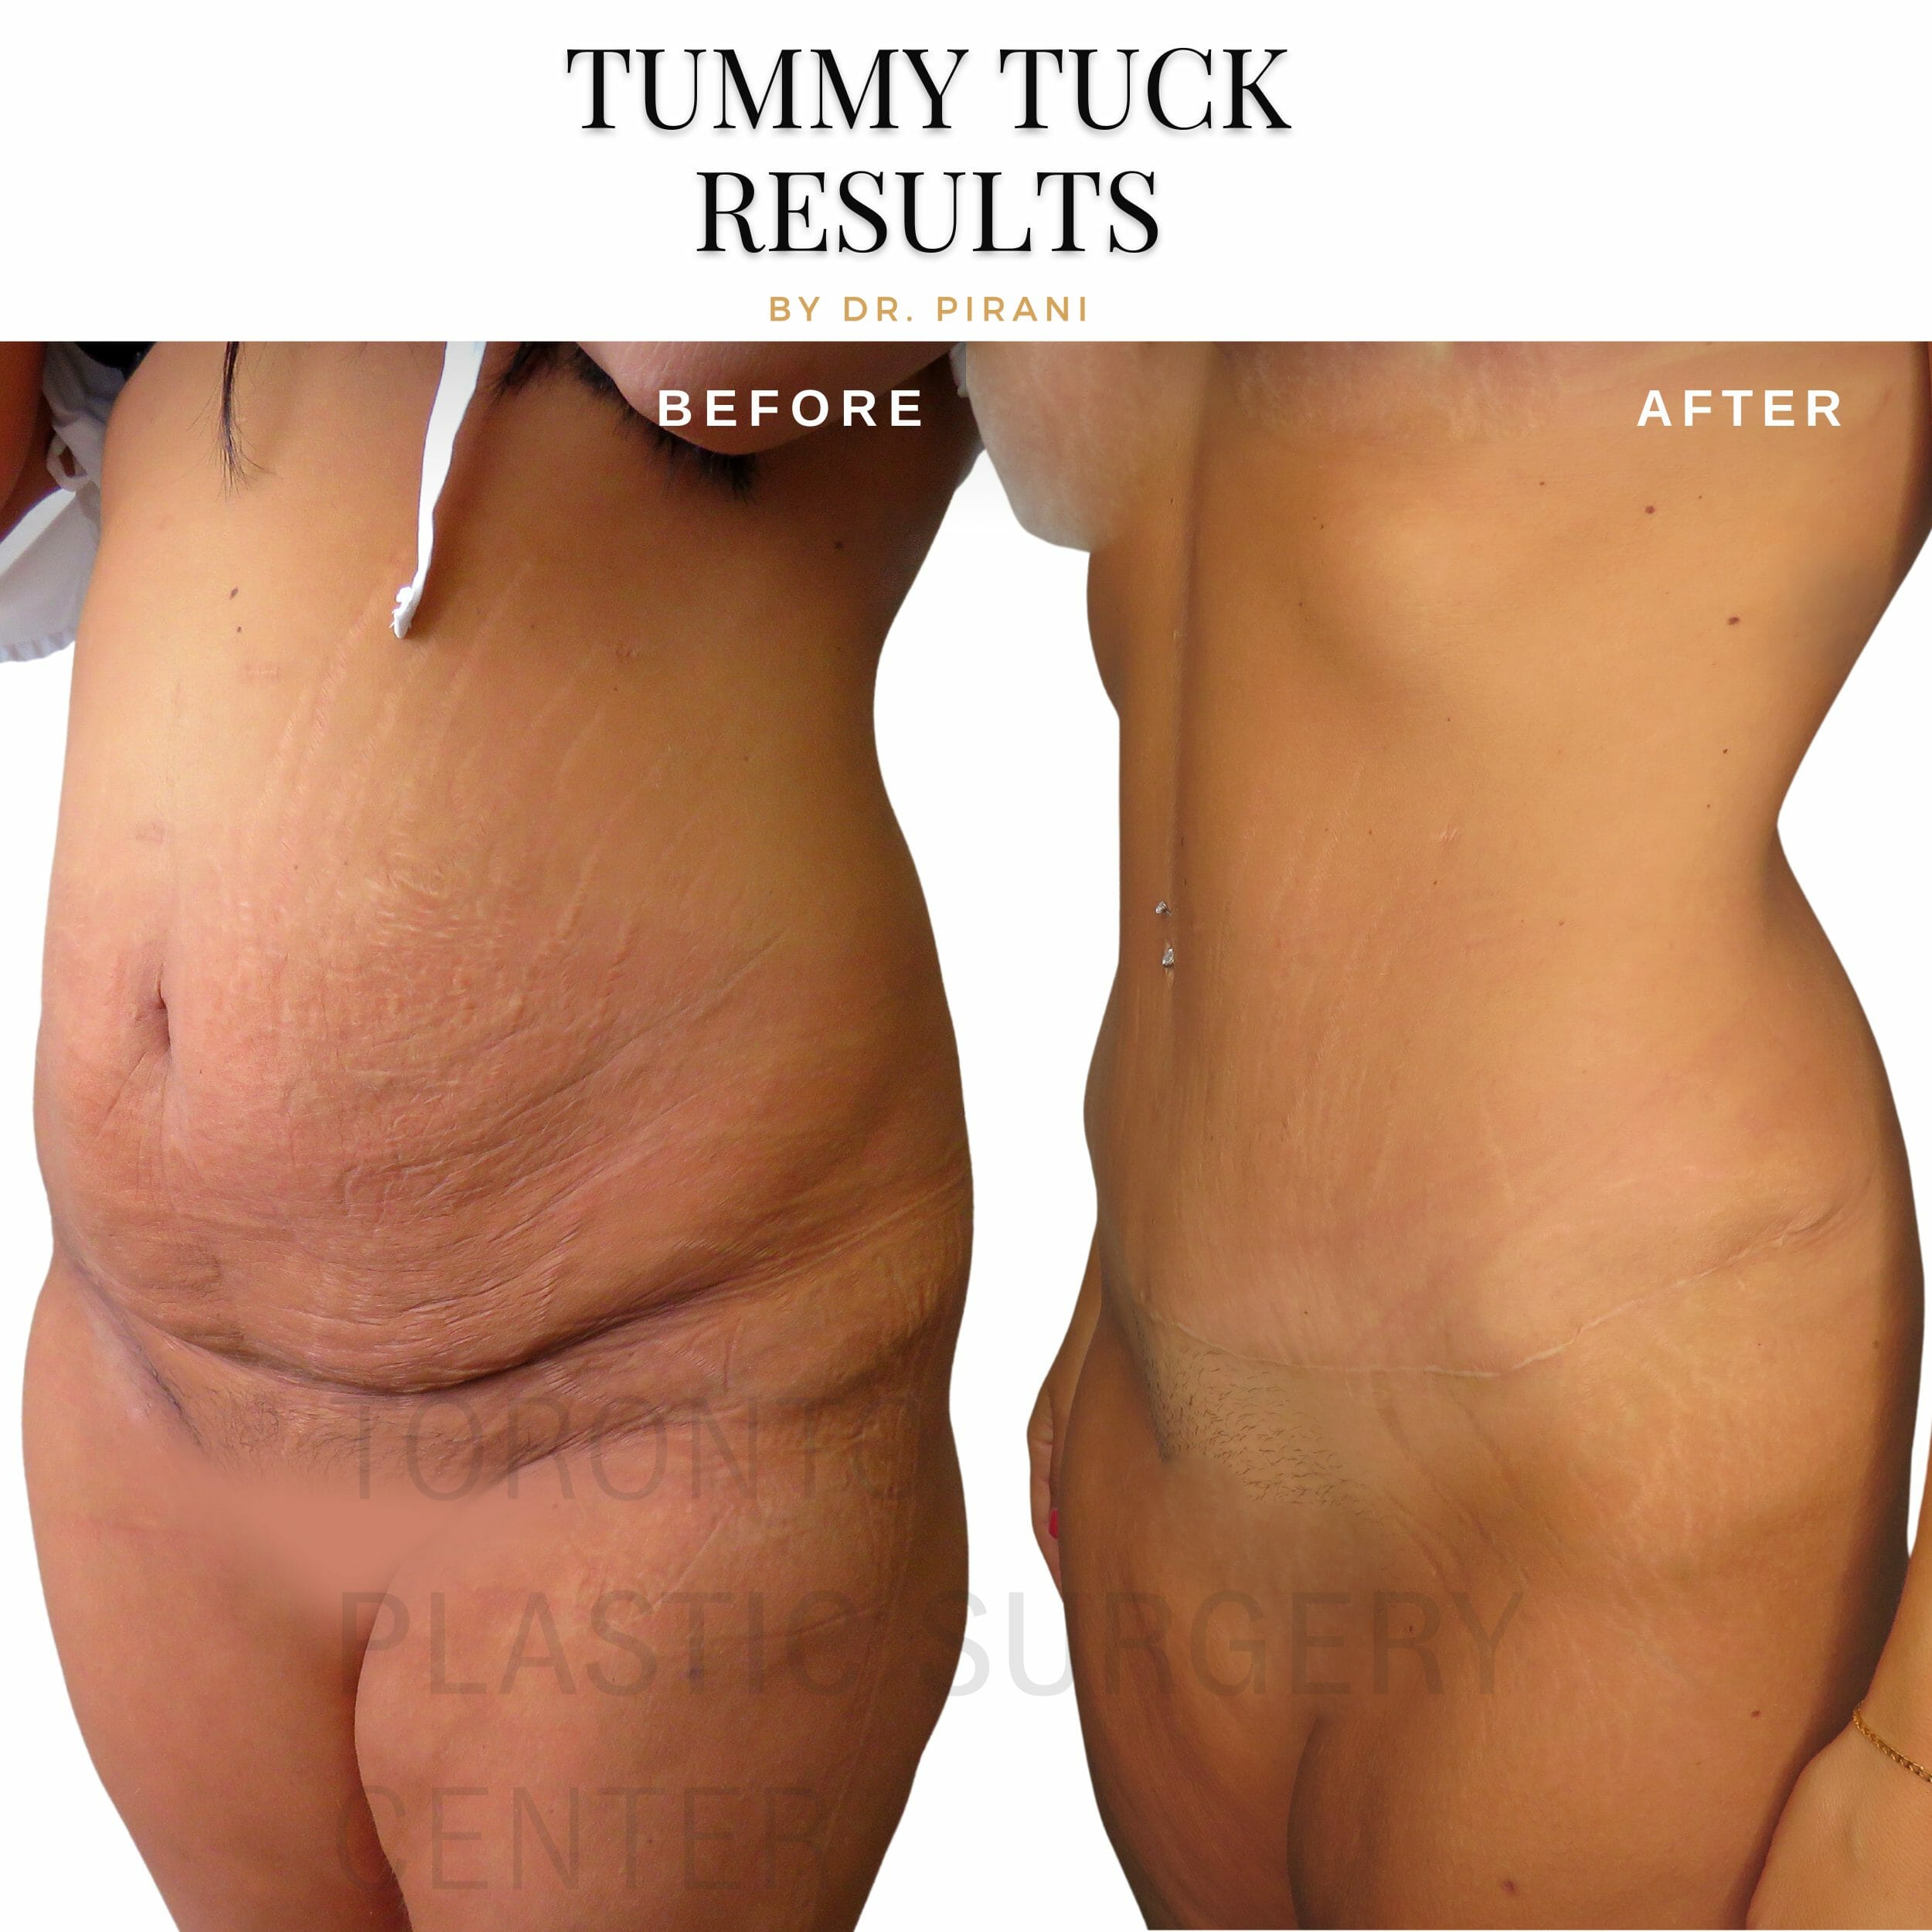 What Happens During a Tummy Tuck?